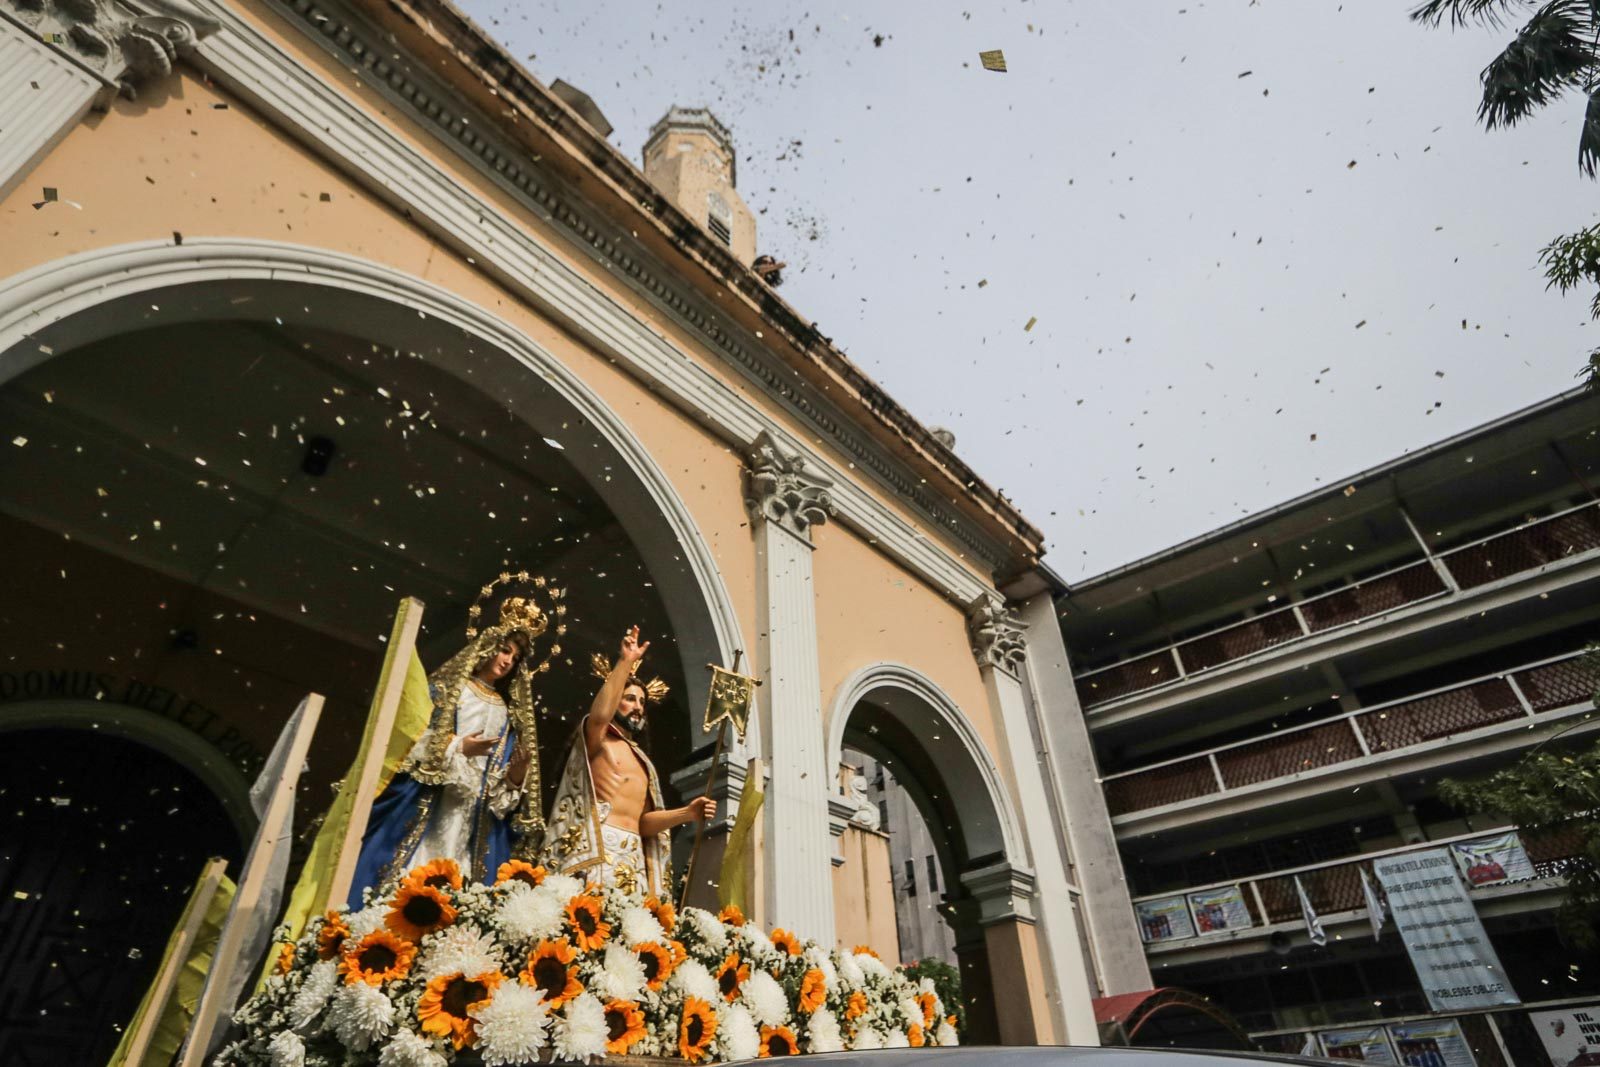 SIGN OF HOPE. While parishioners have to stay home, churches remain the focal point of Easter Sunday on April 12, 2020. Photo by KD Madrilejos/Rappler 